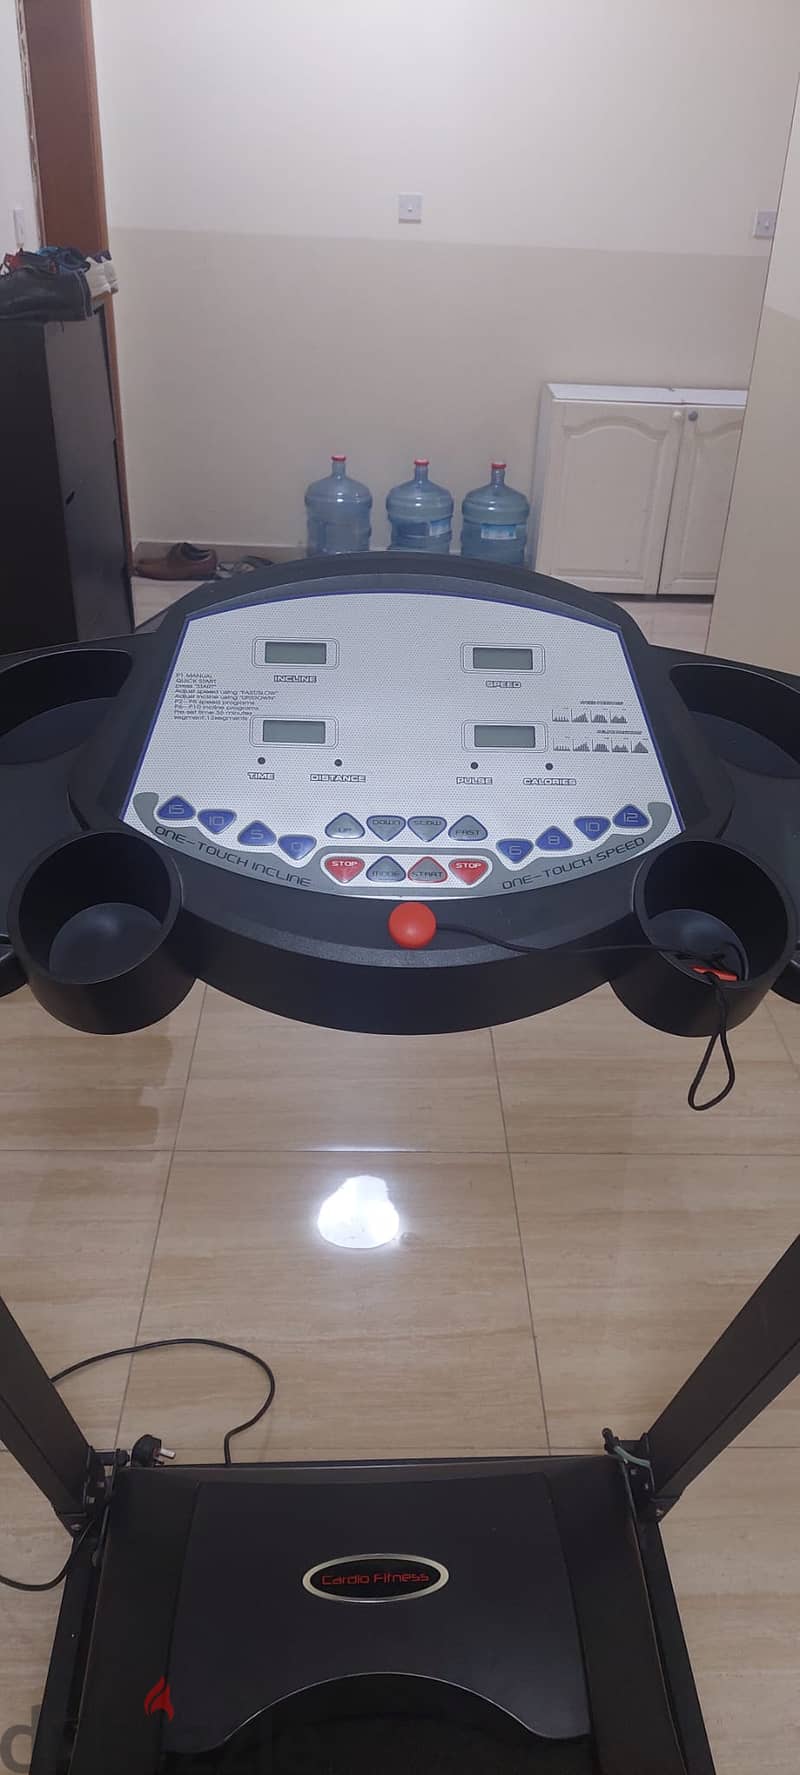 Tread Mill for sale : Made in Korea 2